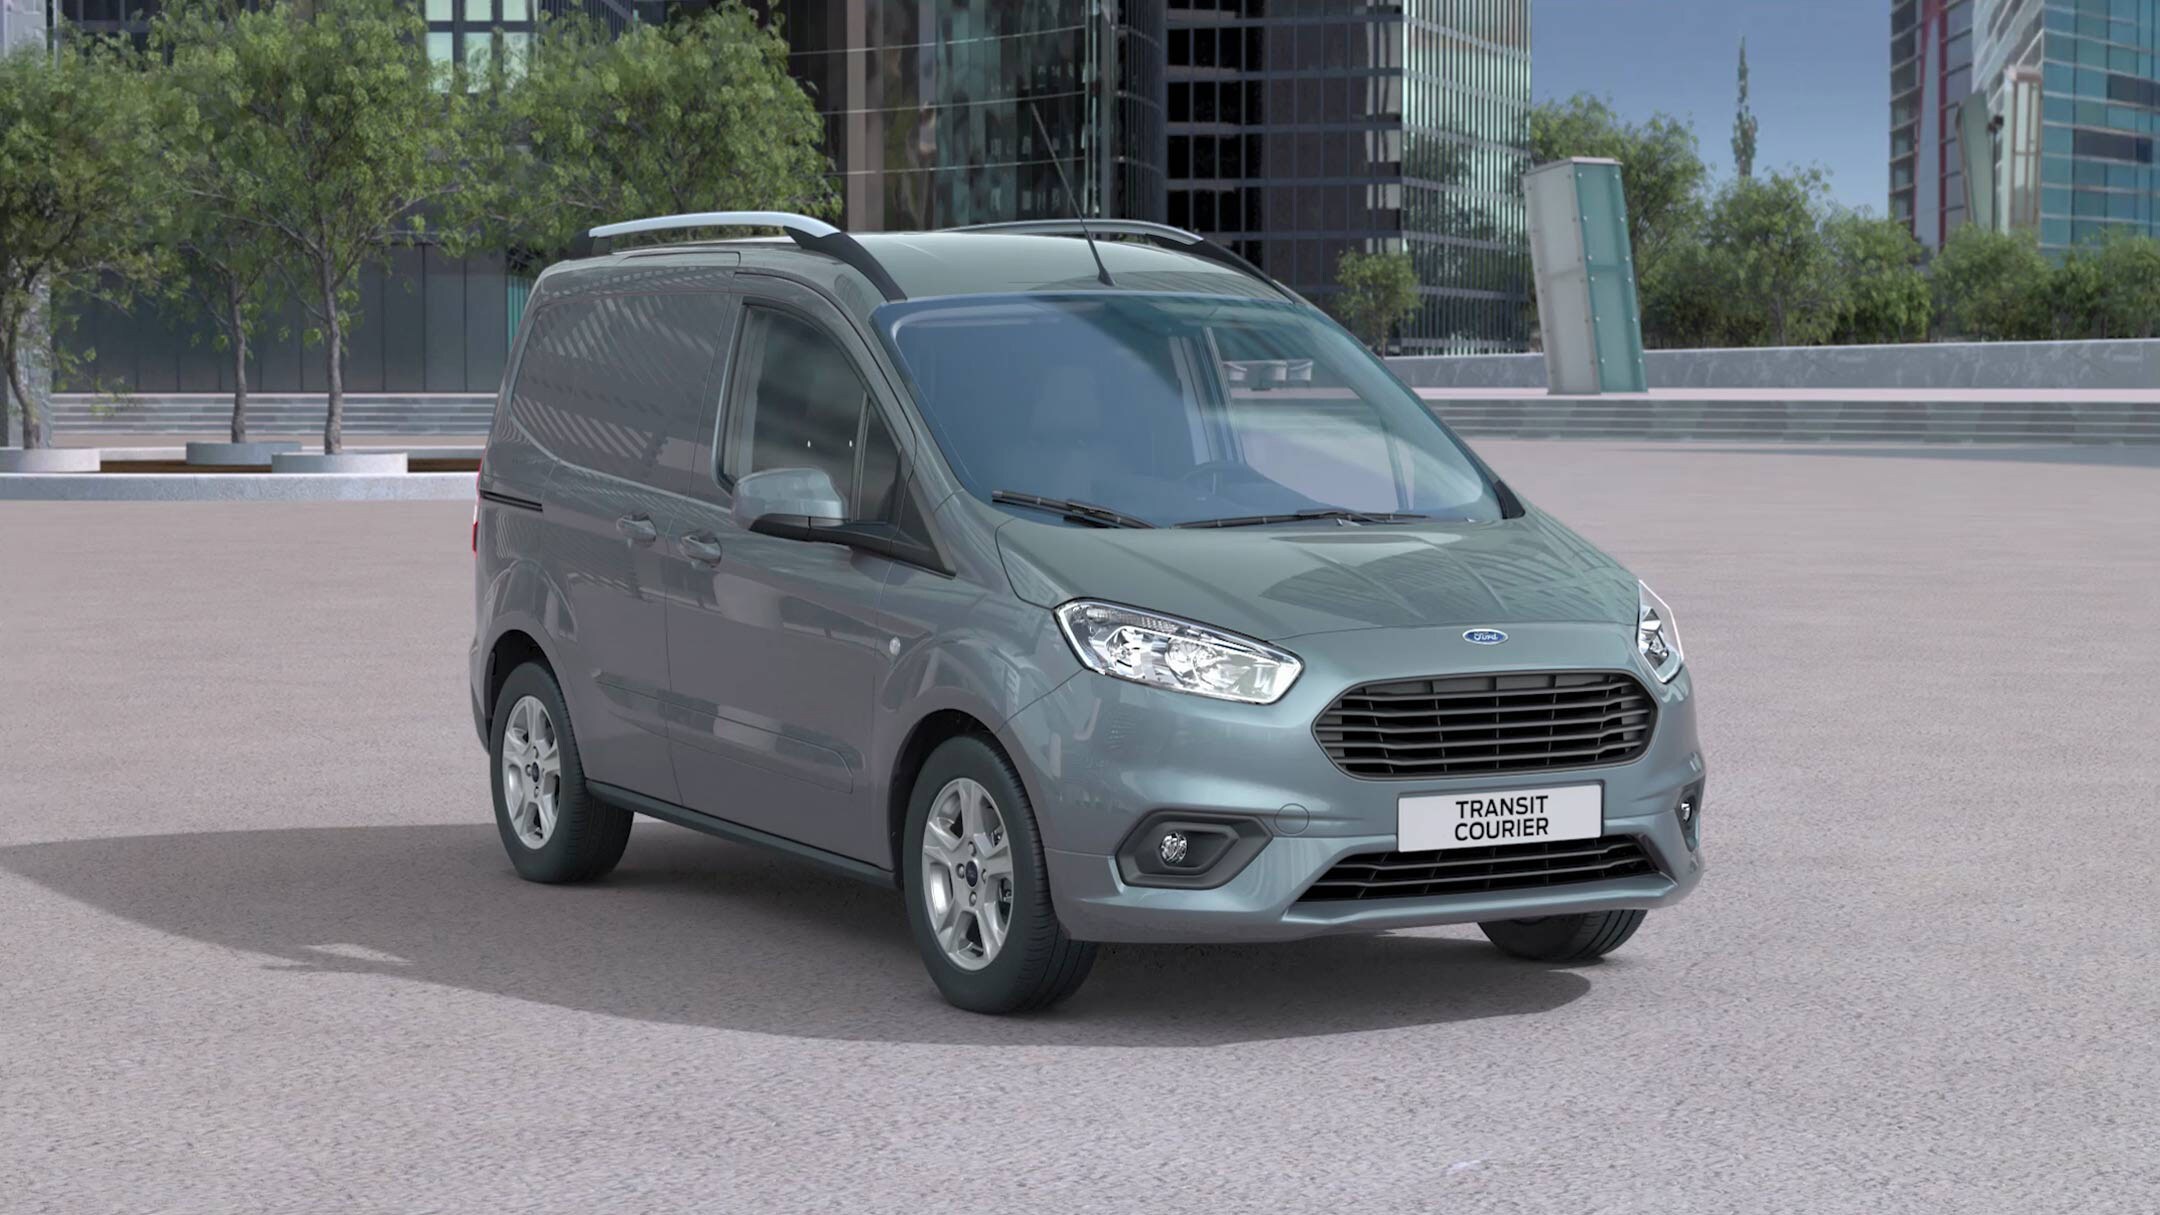 Ford Transit Courier exterior 360 video